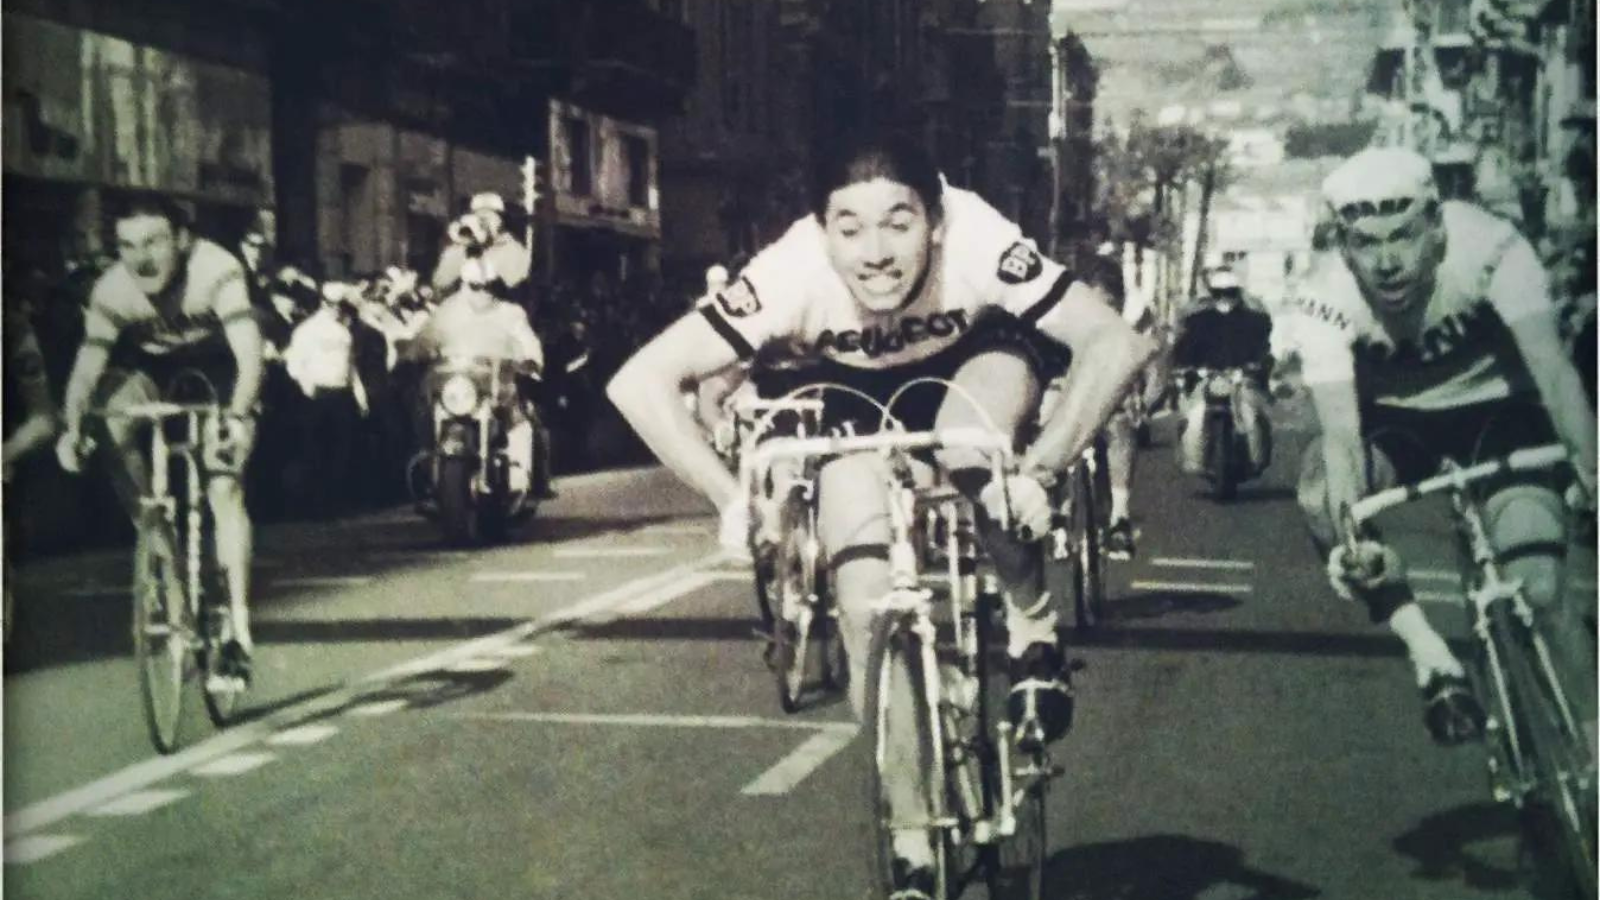 Belgian cycling legend Eddy Merkcx sprints for the victory at Milano-Sanremo spring classic race in 1966